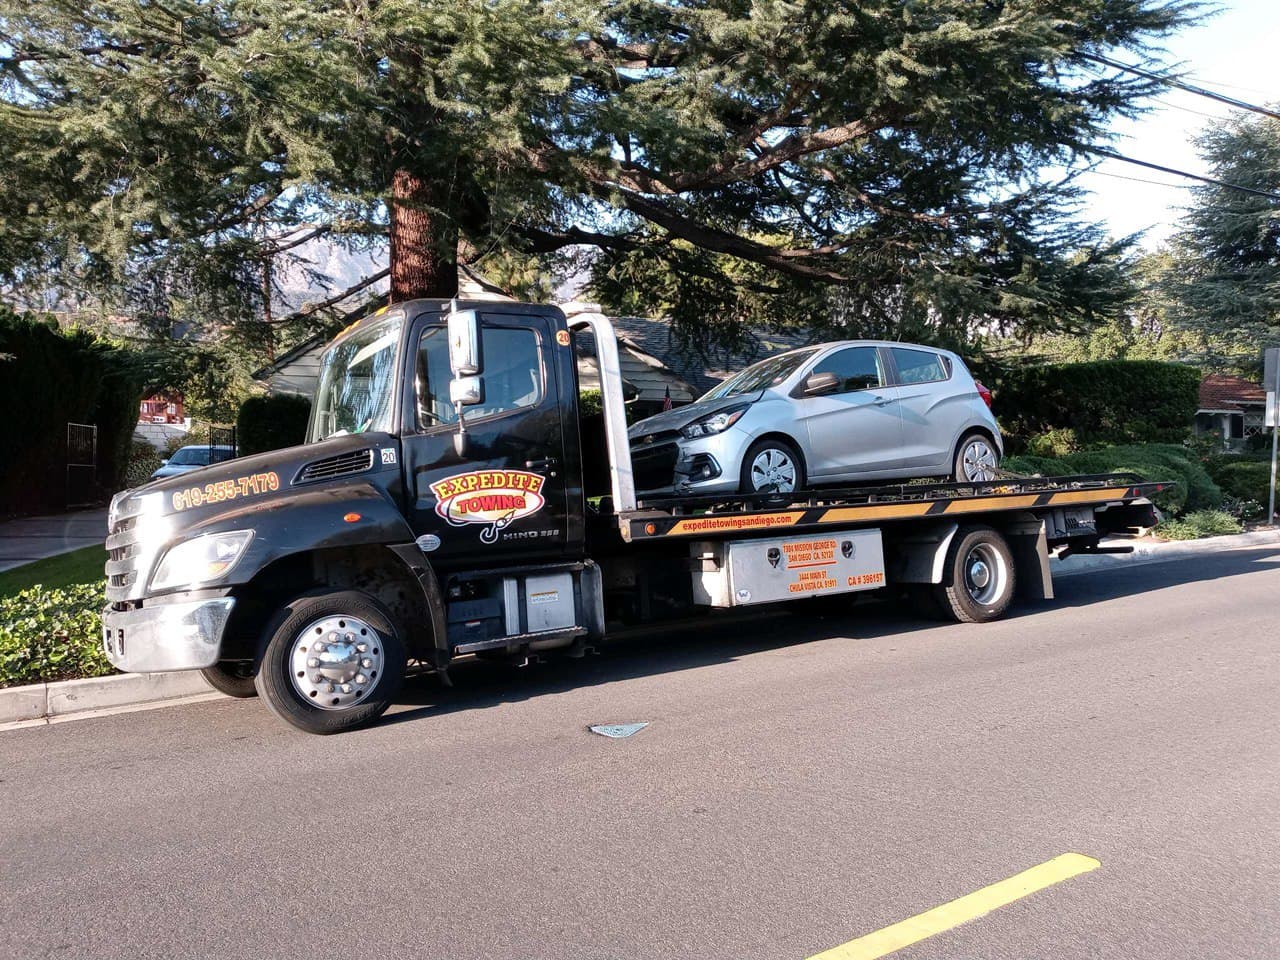 Hire A Towing Company That Follows The Law